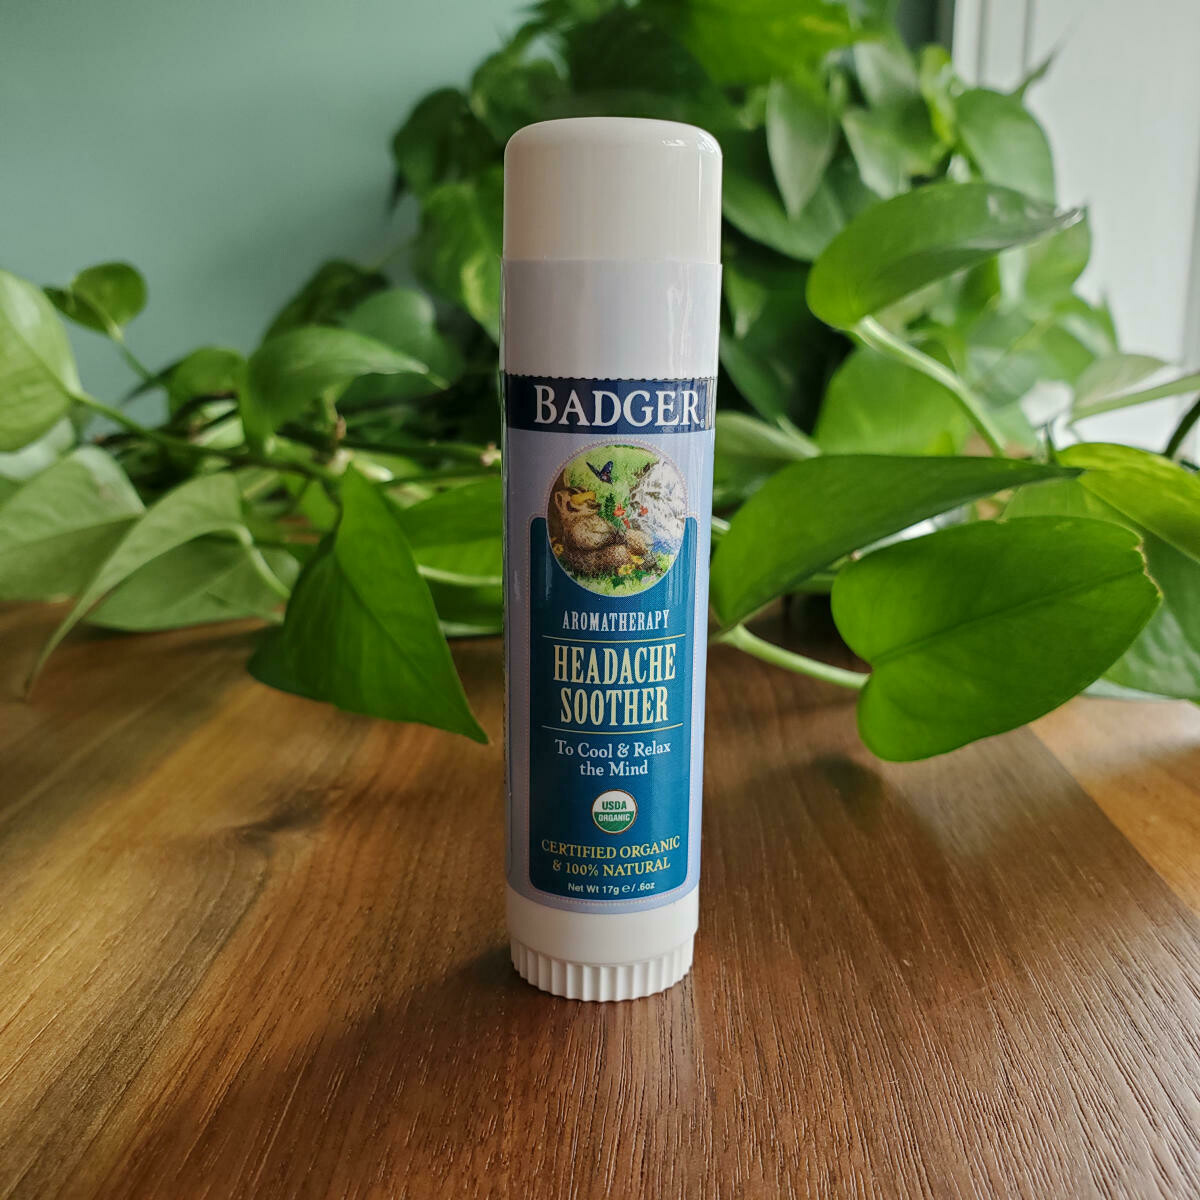 Badger Headache Soother Portable Aromatherapy